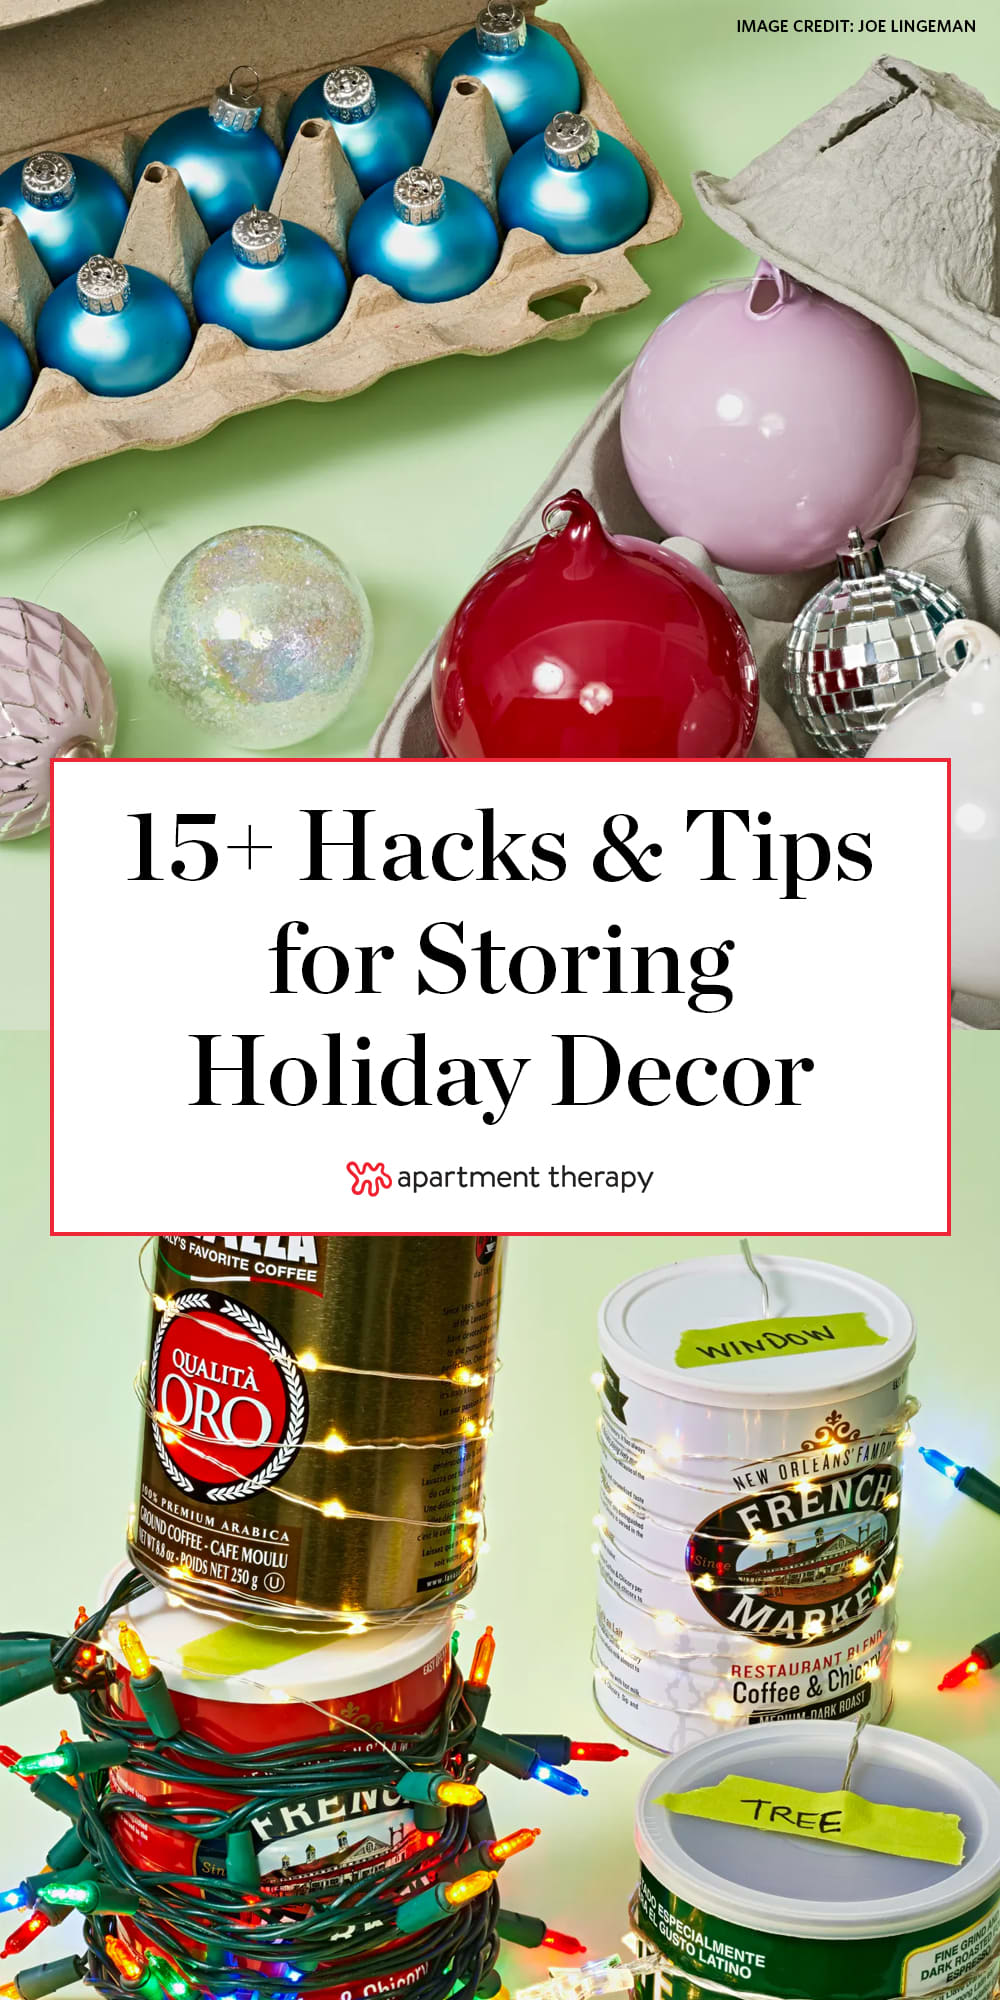 Organize Your Christmas Ornaments with These Clever Storage Ideas